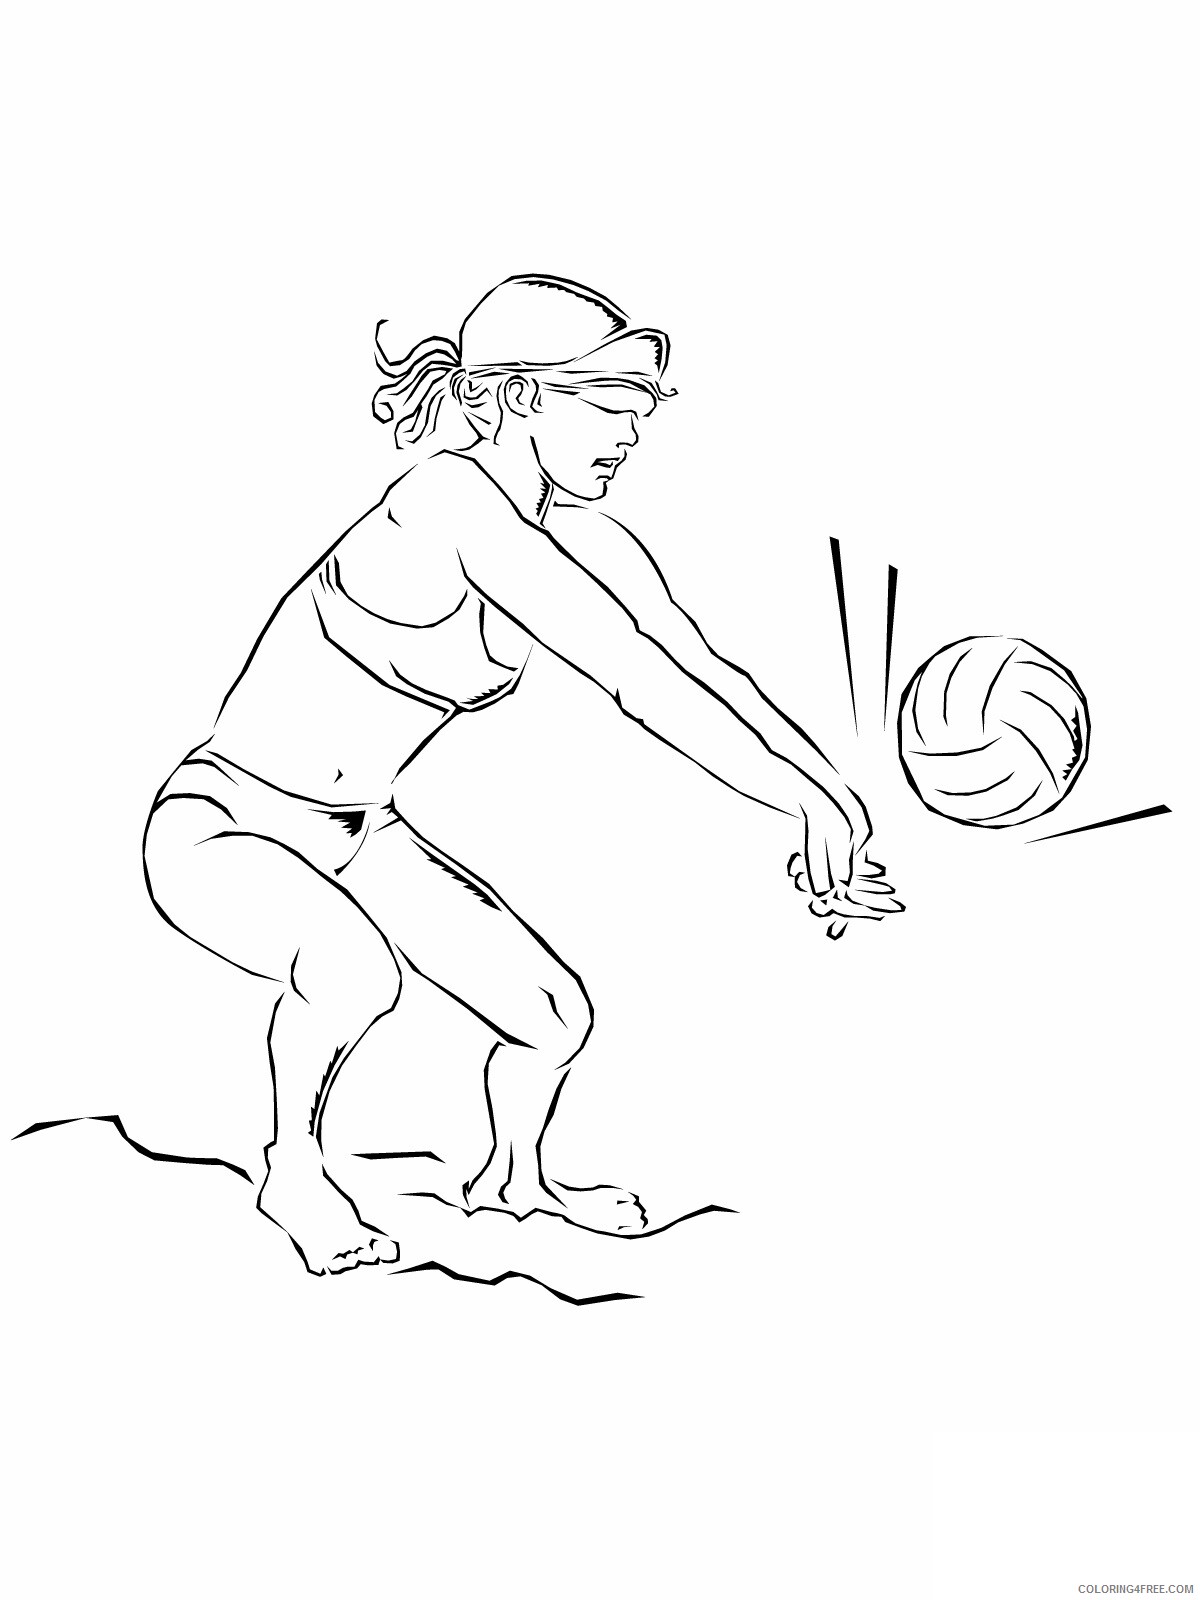 Volleyball Coloring Pages for Kids Volleyball To Print Printable 2021 768 Coloring4free